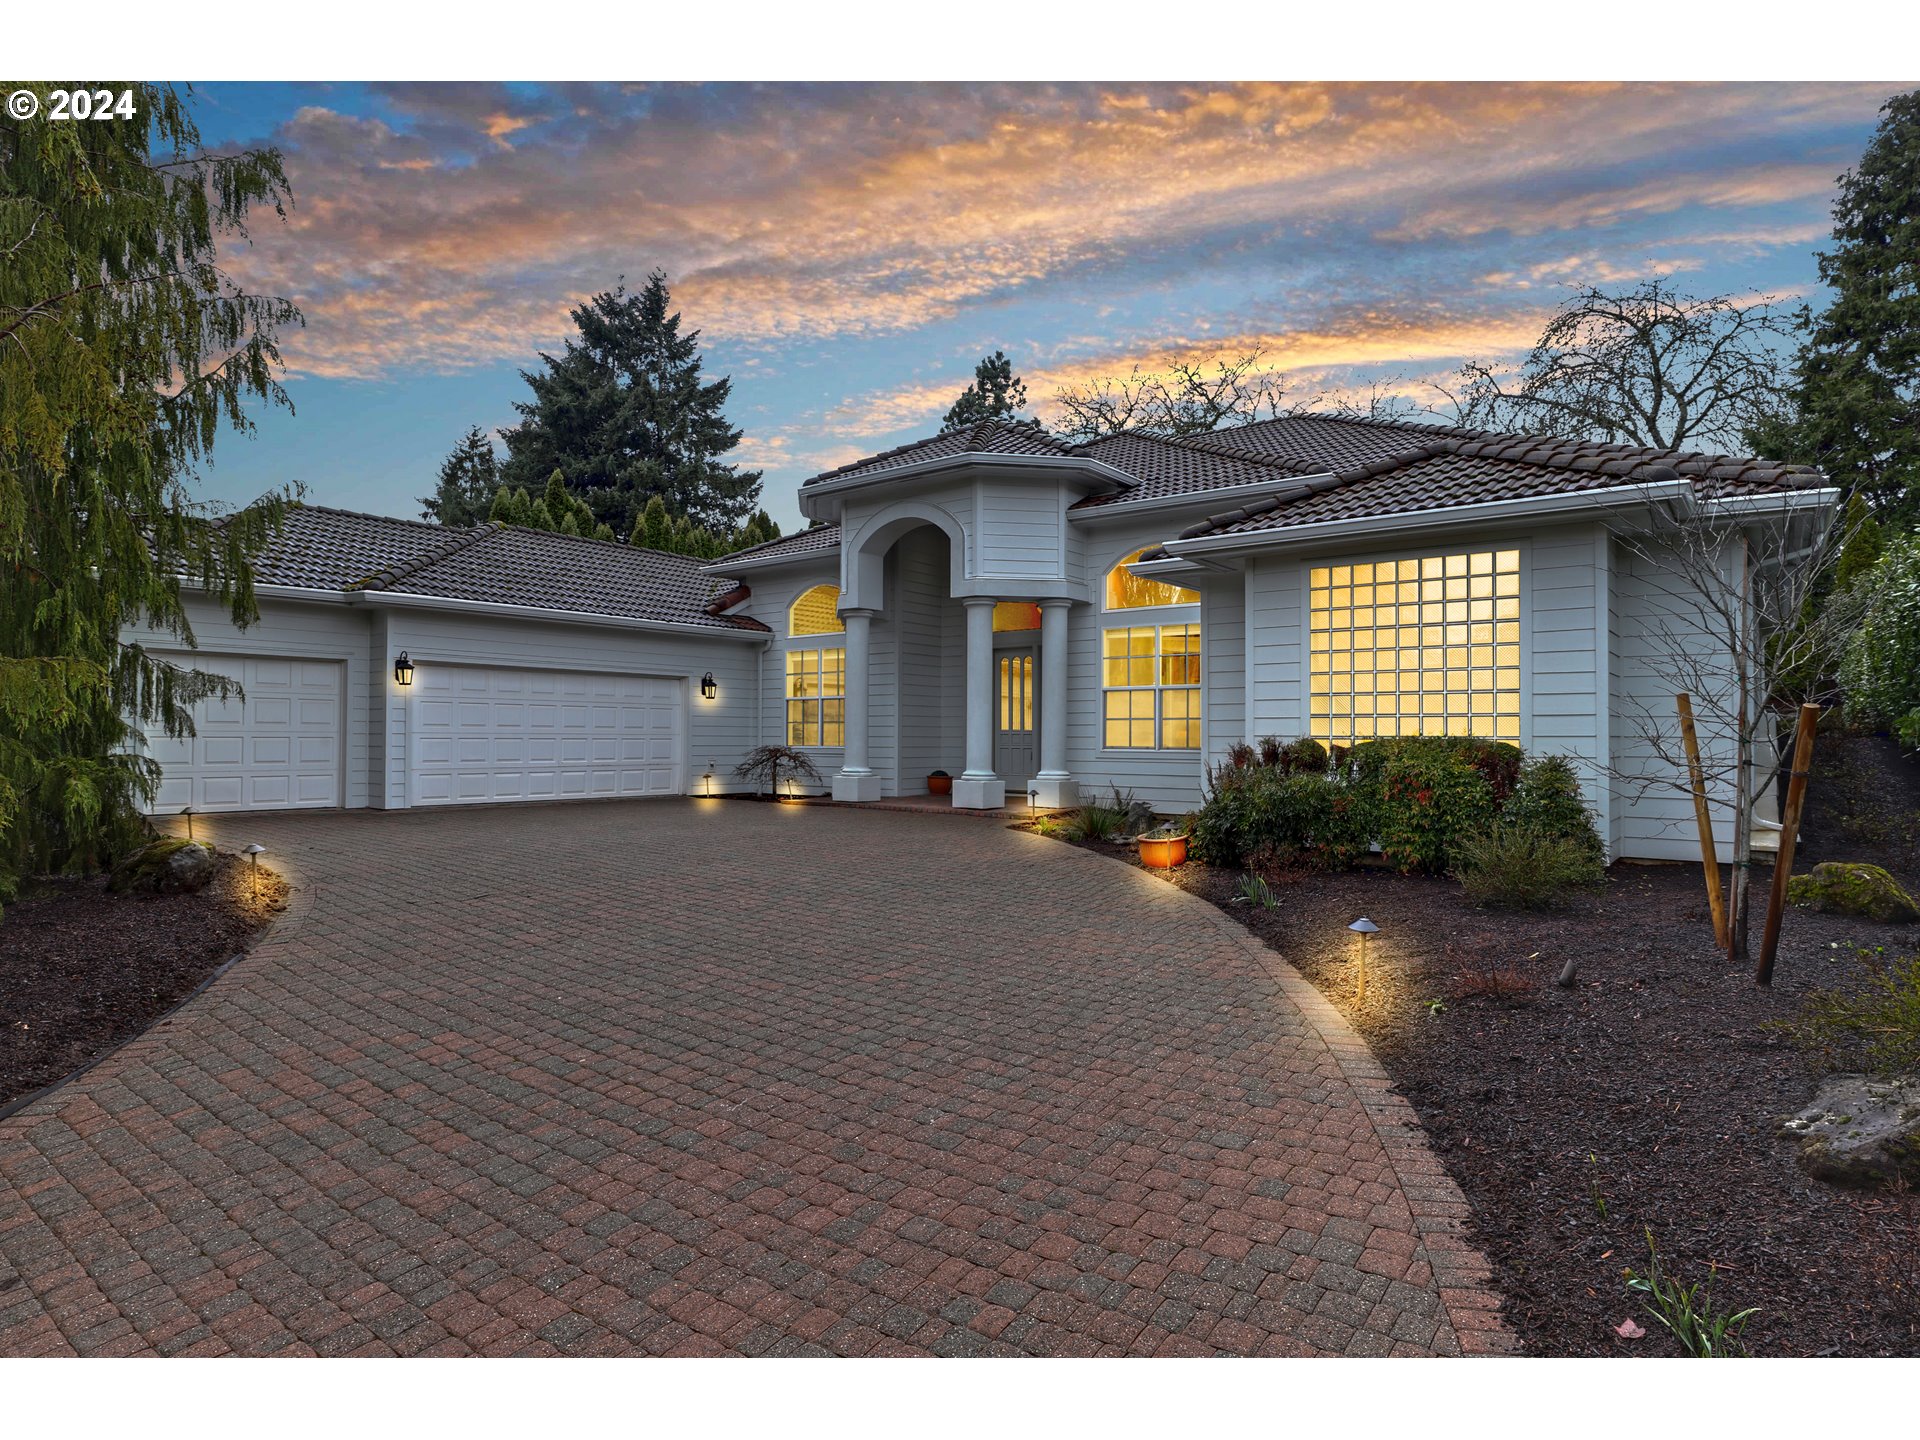 14645 SW 139TH AVE, Tigard, OR 